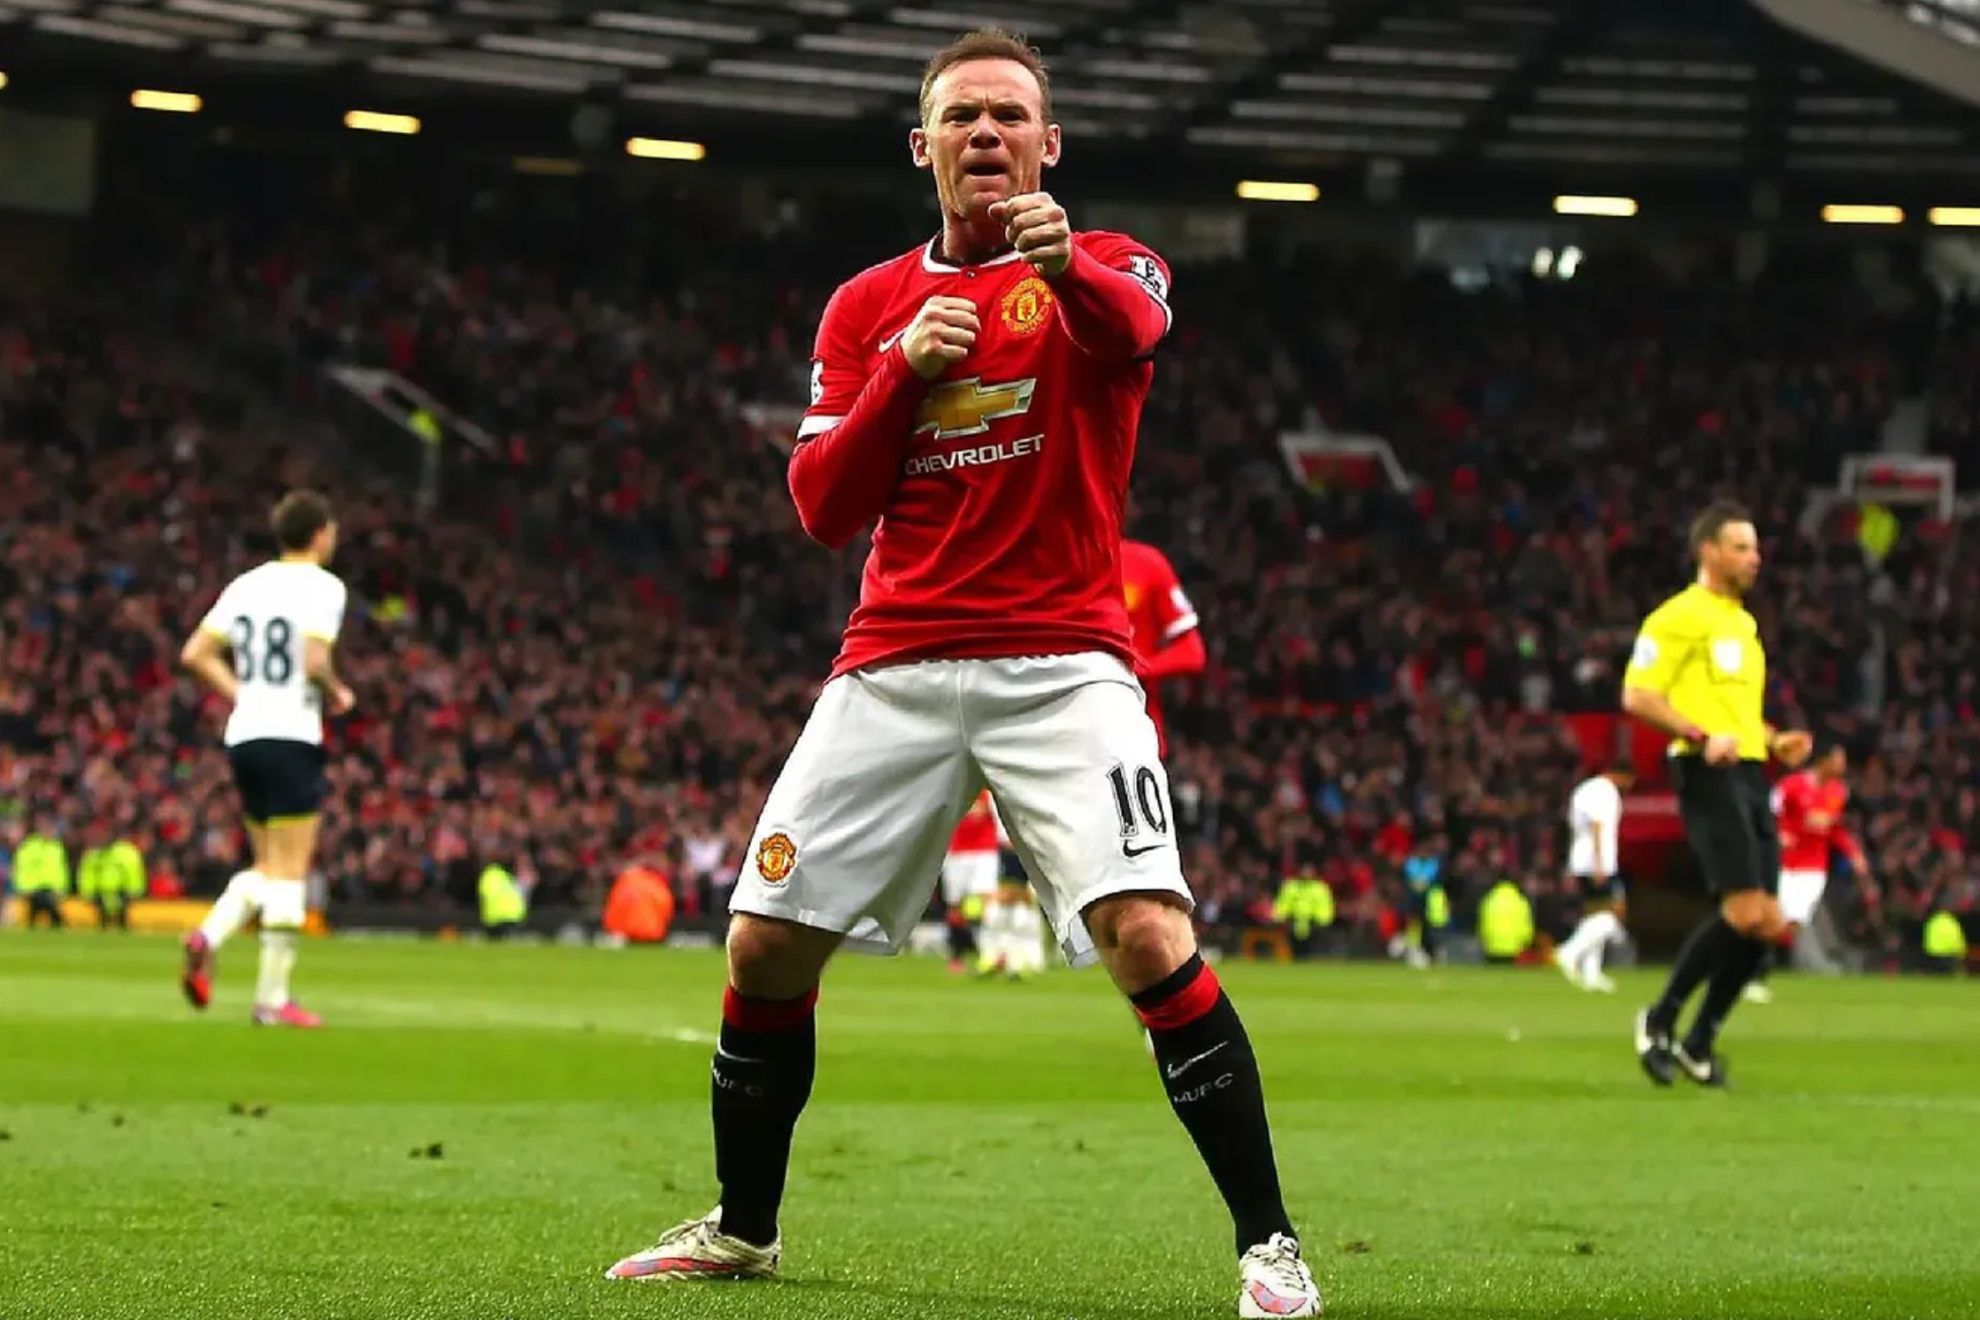 Could Wayne Rooney fight Zlatan Ibrahimovic? Possible boxing match between the ex-footballers